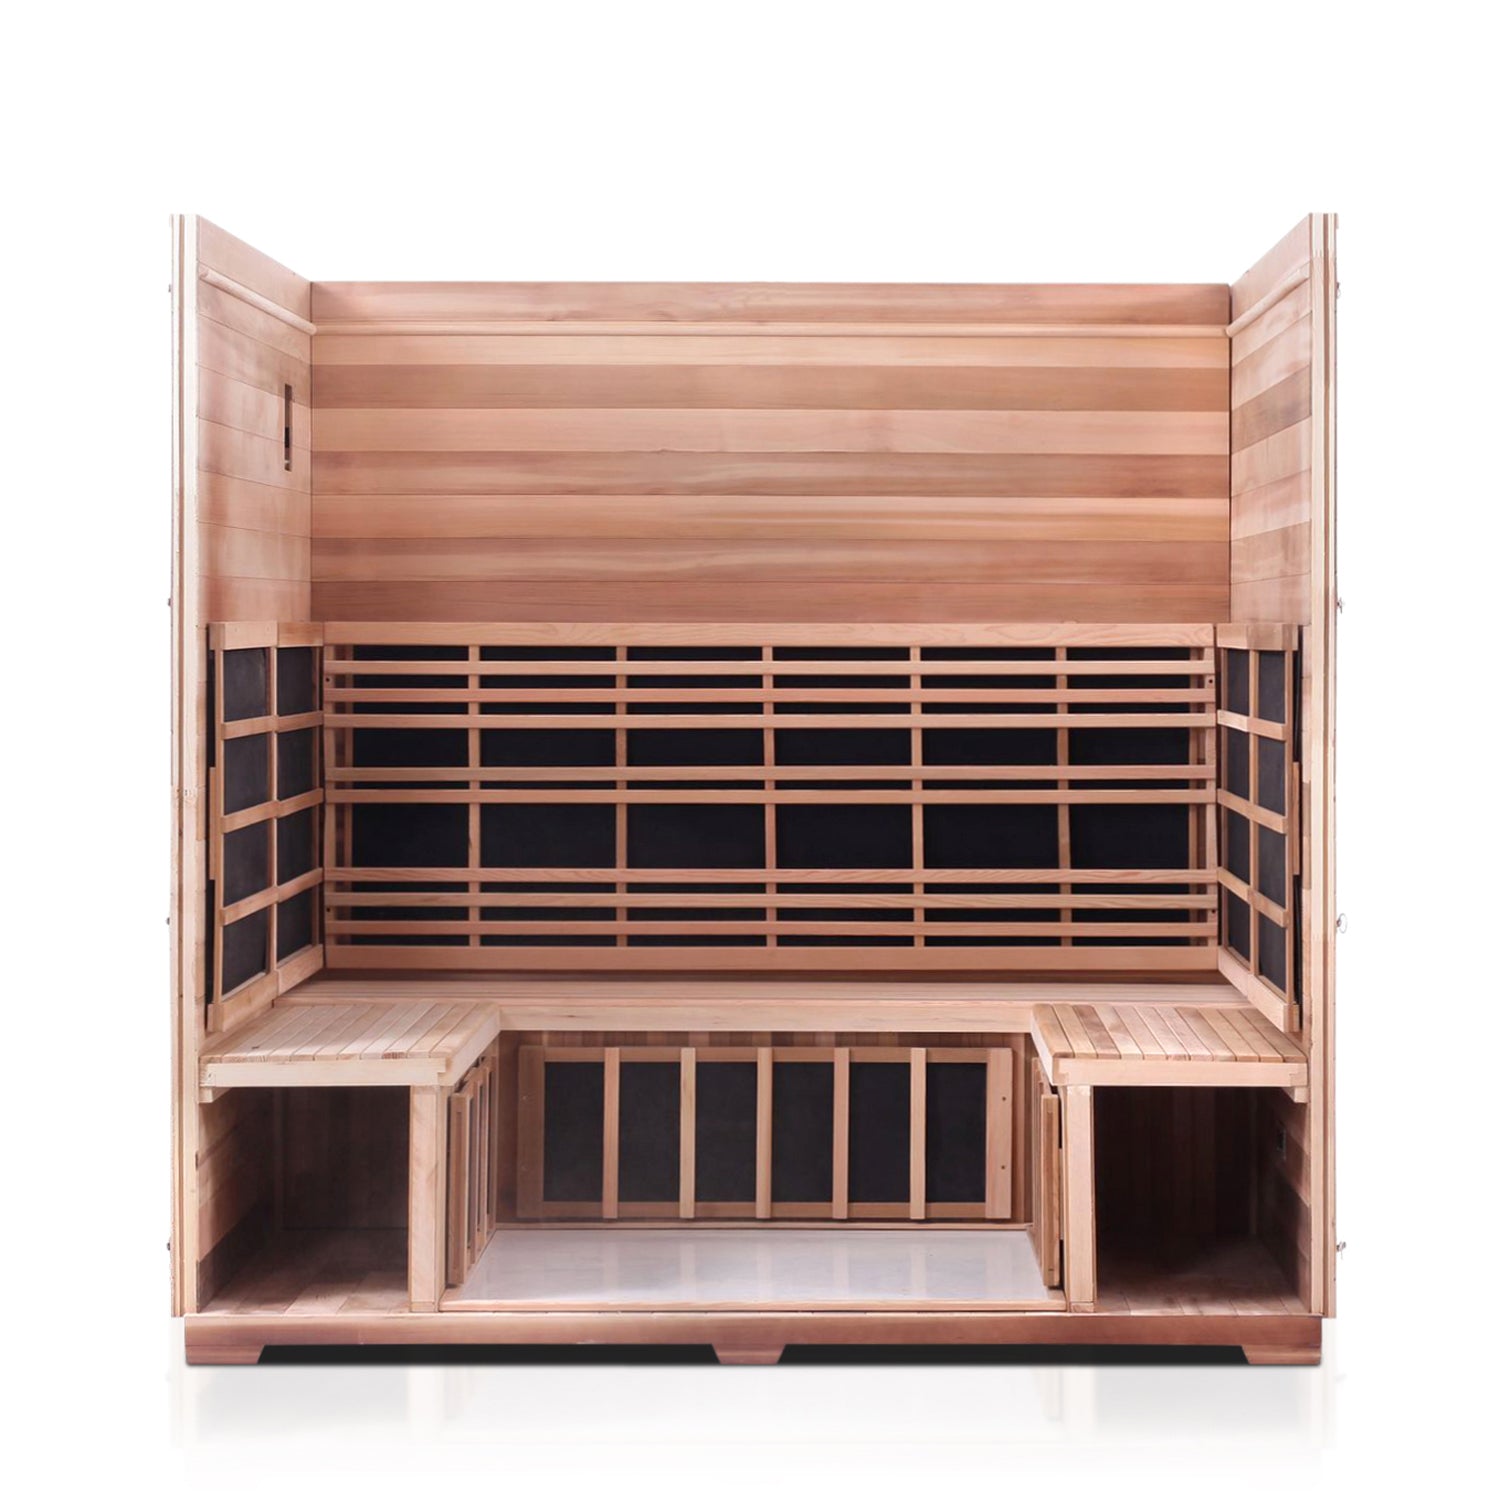 Enlighten Sauna Sierra 5 Person Slope Roof with roof and front panel removed showing inside structure